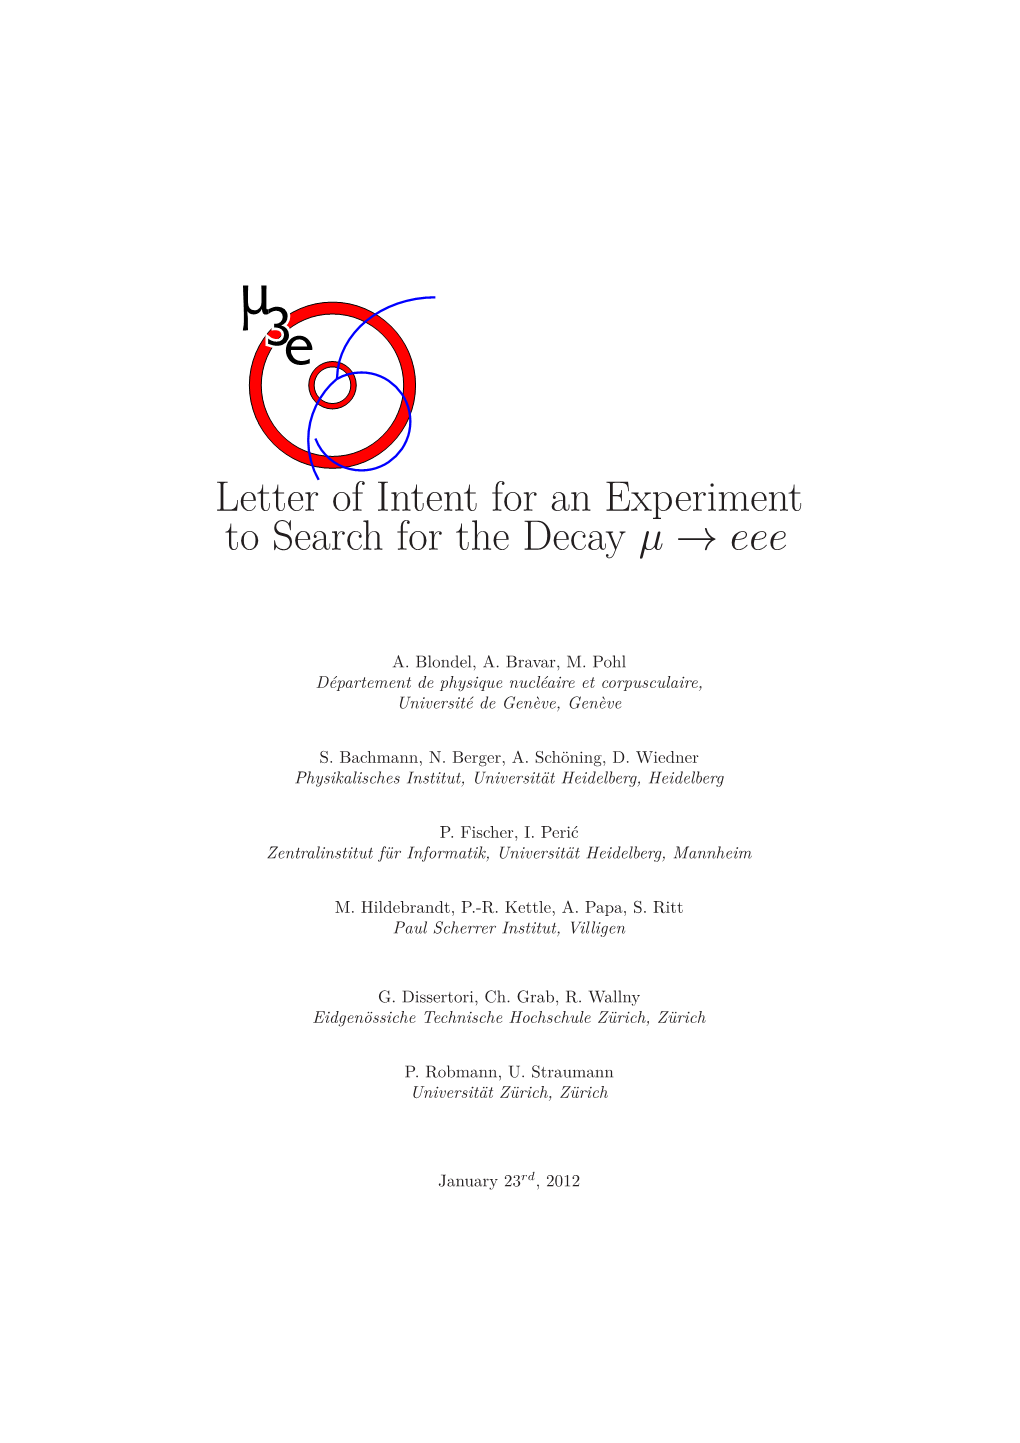 Letter of Intent for an Experiment to Search for the Decay Μ →